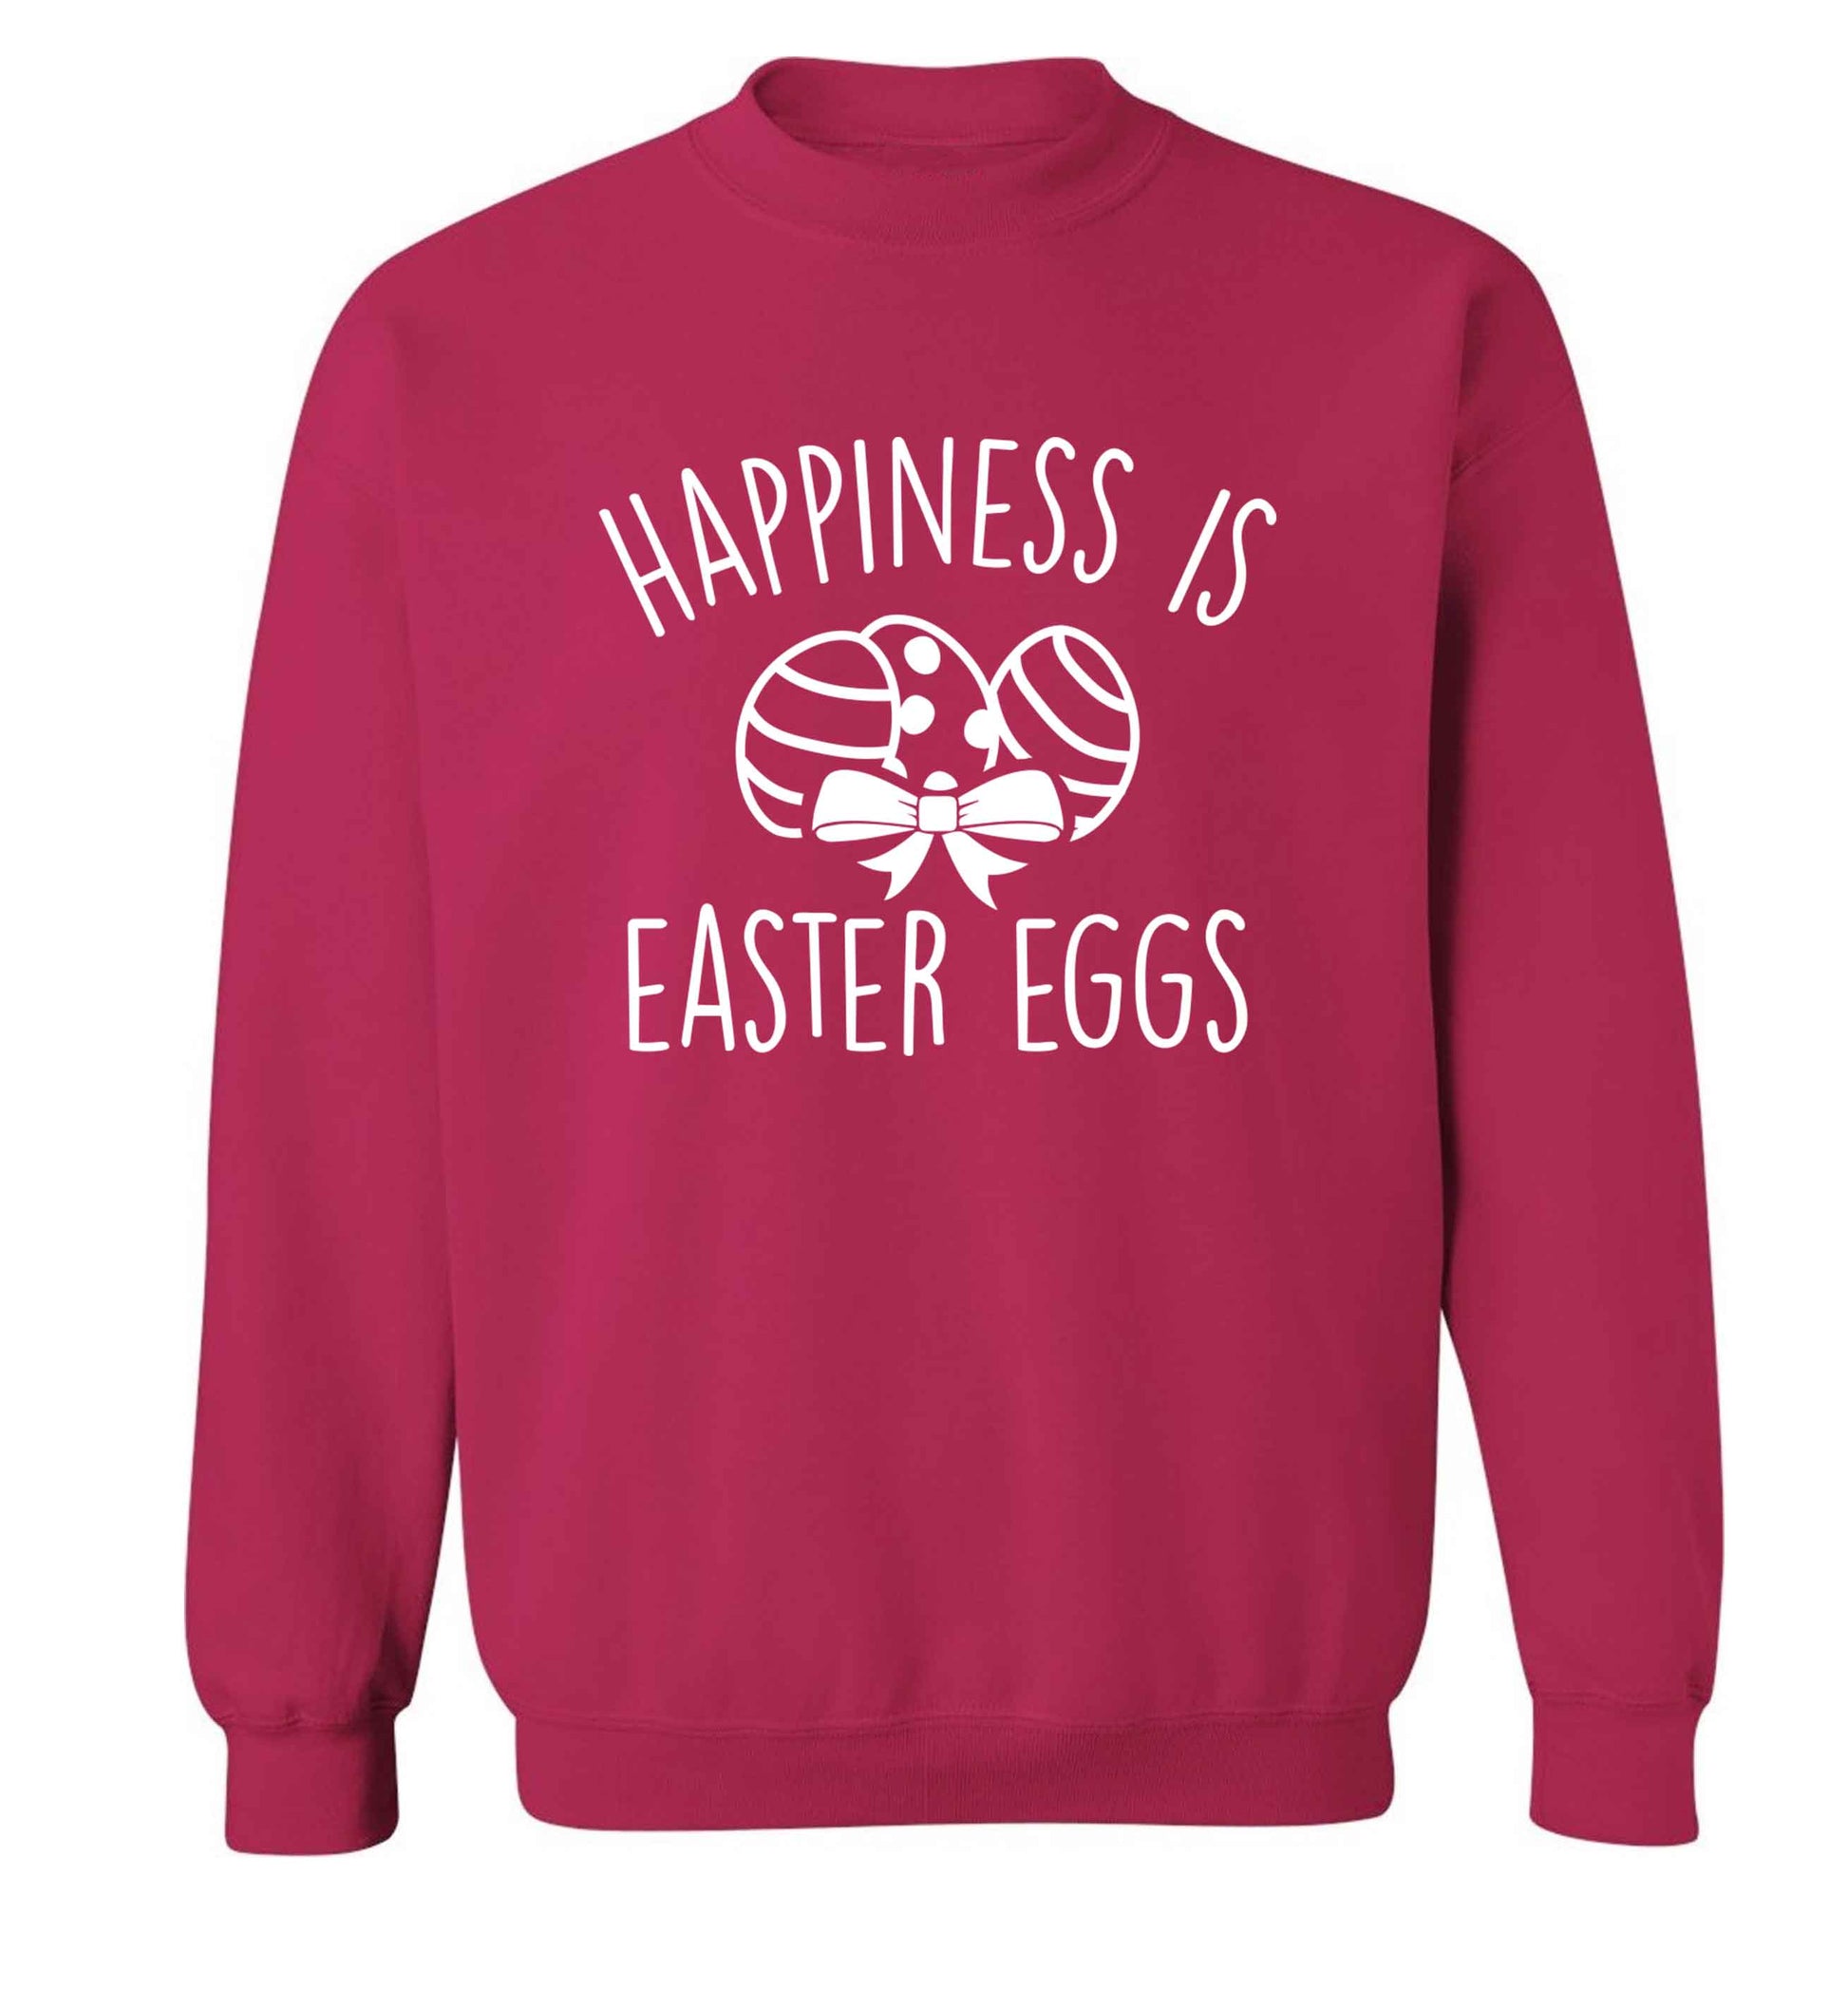 Happiness is Easter eggs adult's unisex pink sweater 2XL